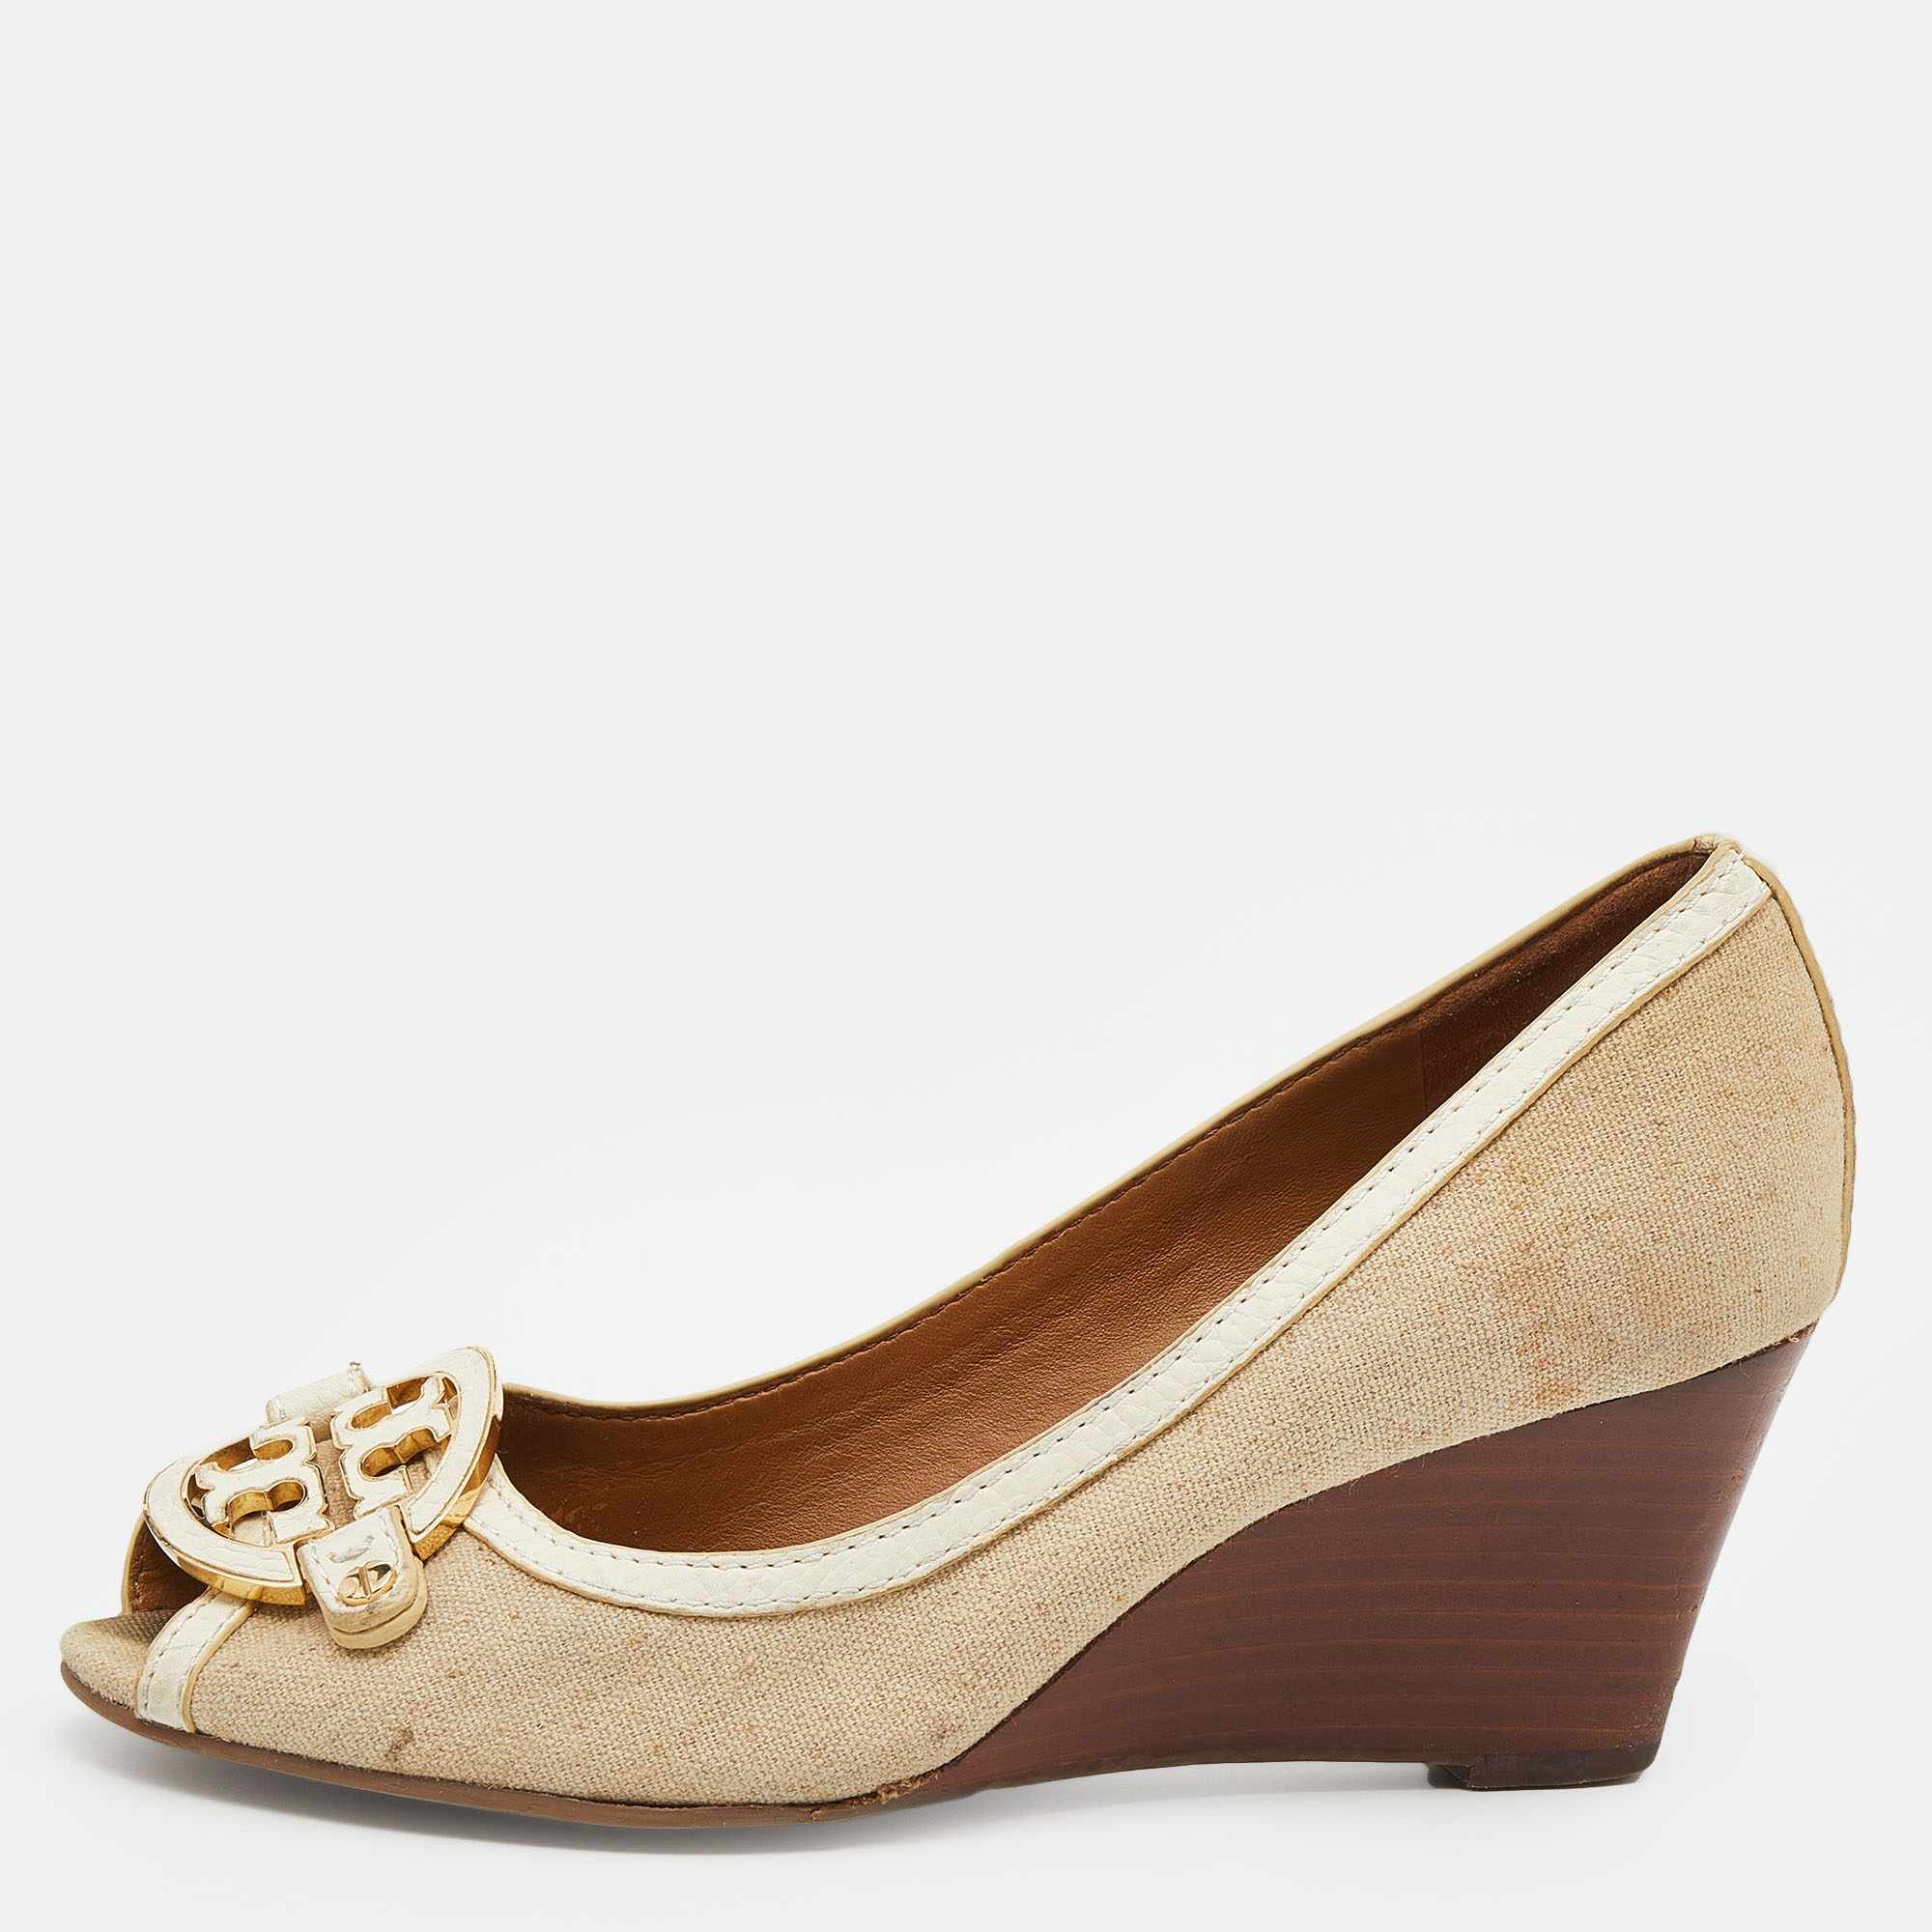 Tory Burch Beige/White Canvas And Leather Amanda Peep Toe Wedge Pumps Size 38